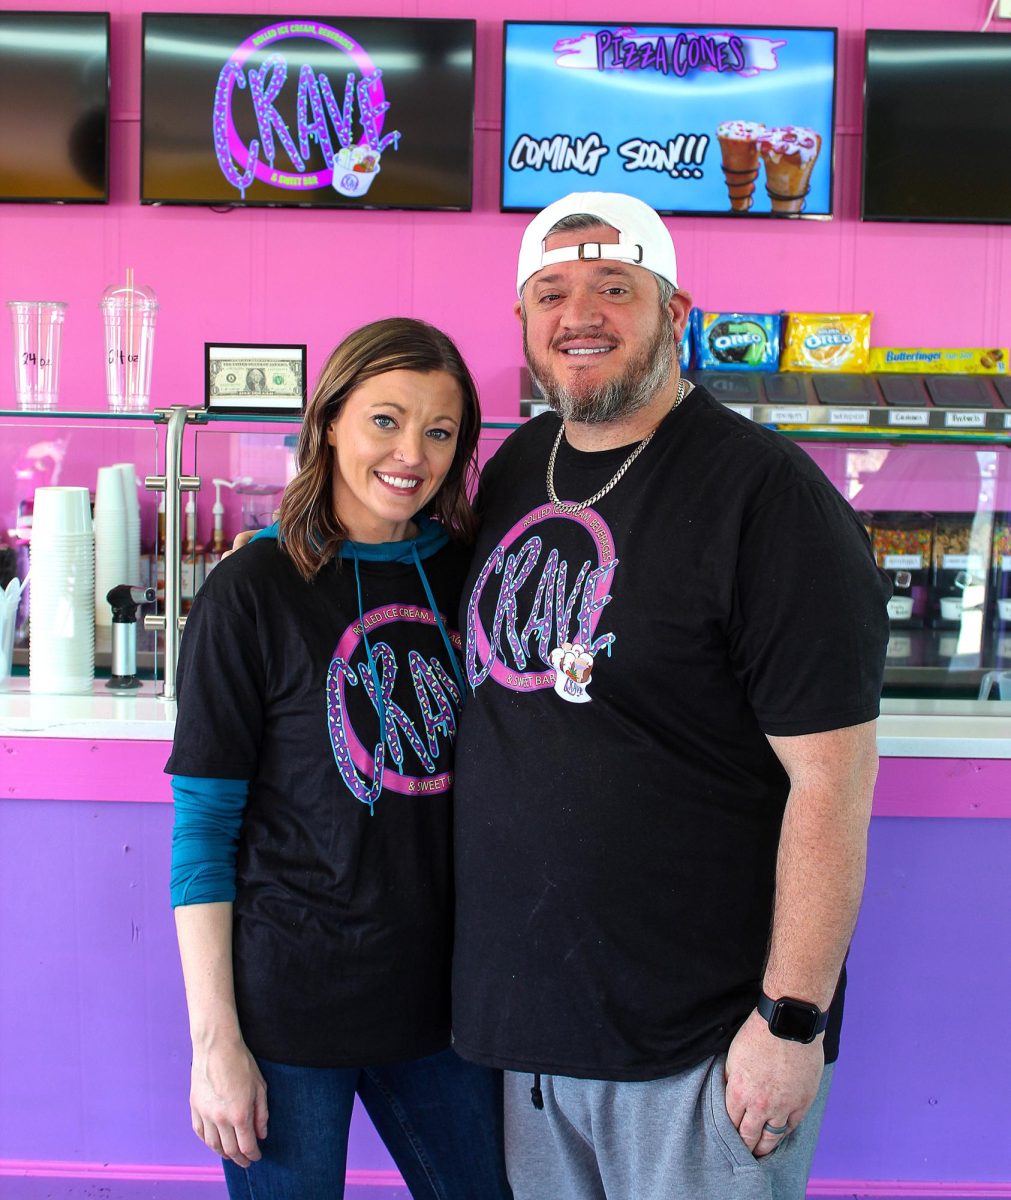 Crave, a new business owned by Heather and Tyler Cook, will be serving rolled ice cream to customers, tentatively beginning in April.